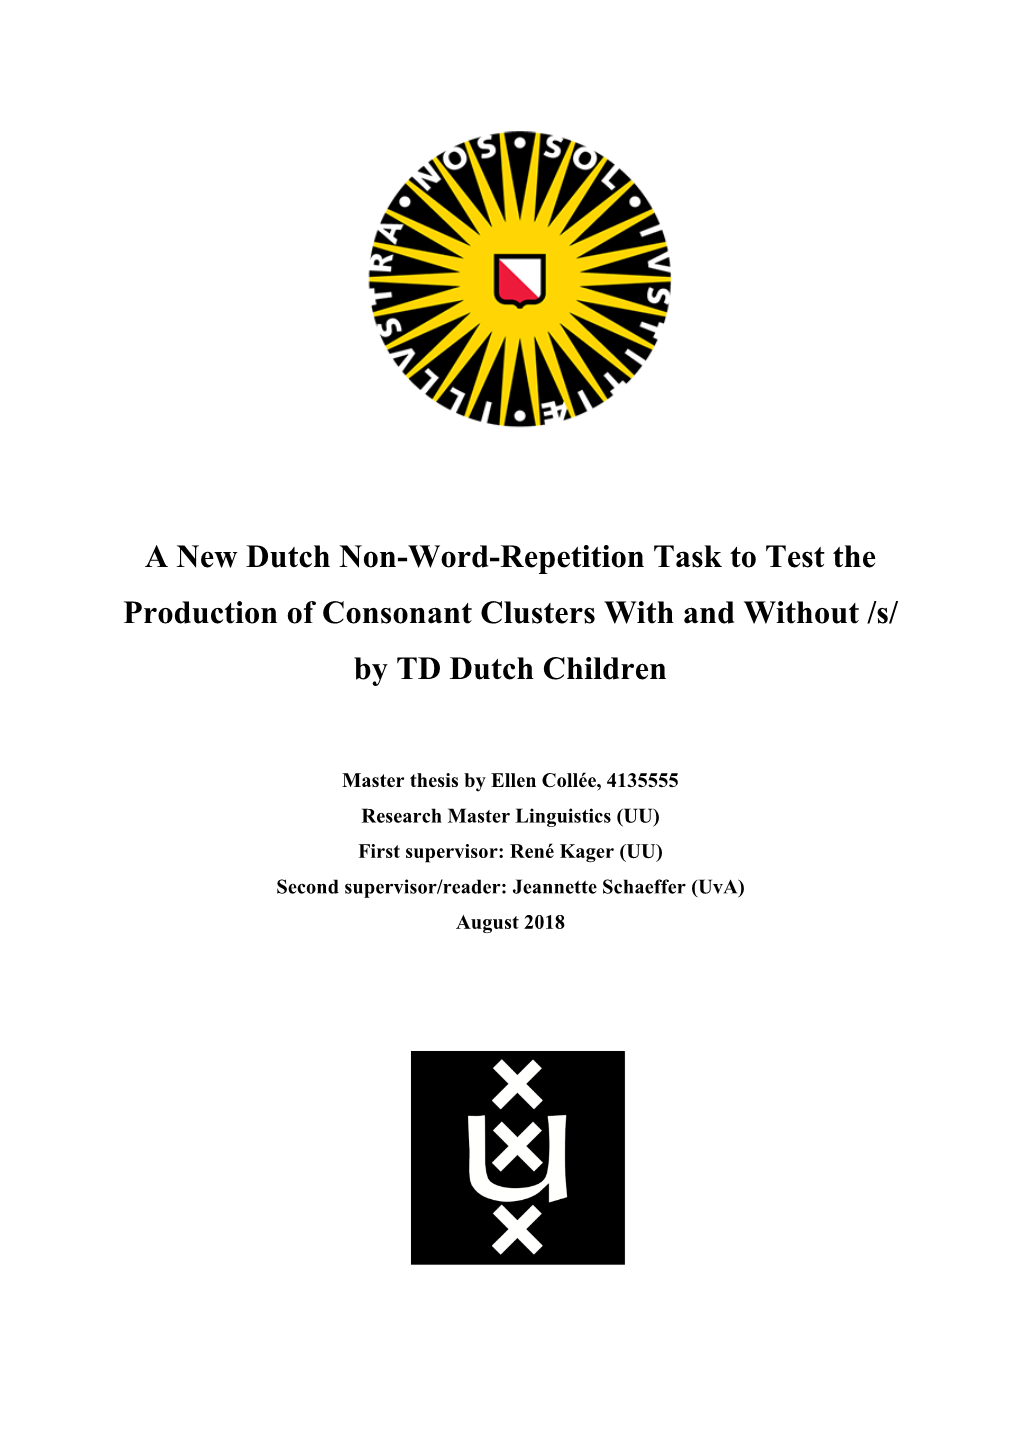 A New Dutch Non-Word-Repetition Task to Test the Production of Consonant Clusters with and Without /S/ by TD Dutch Children